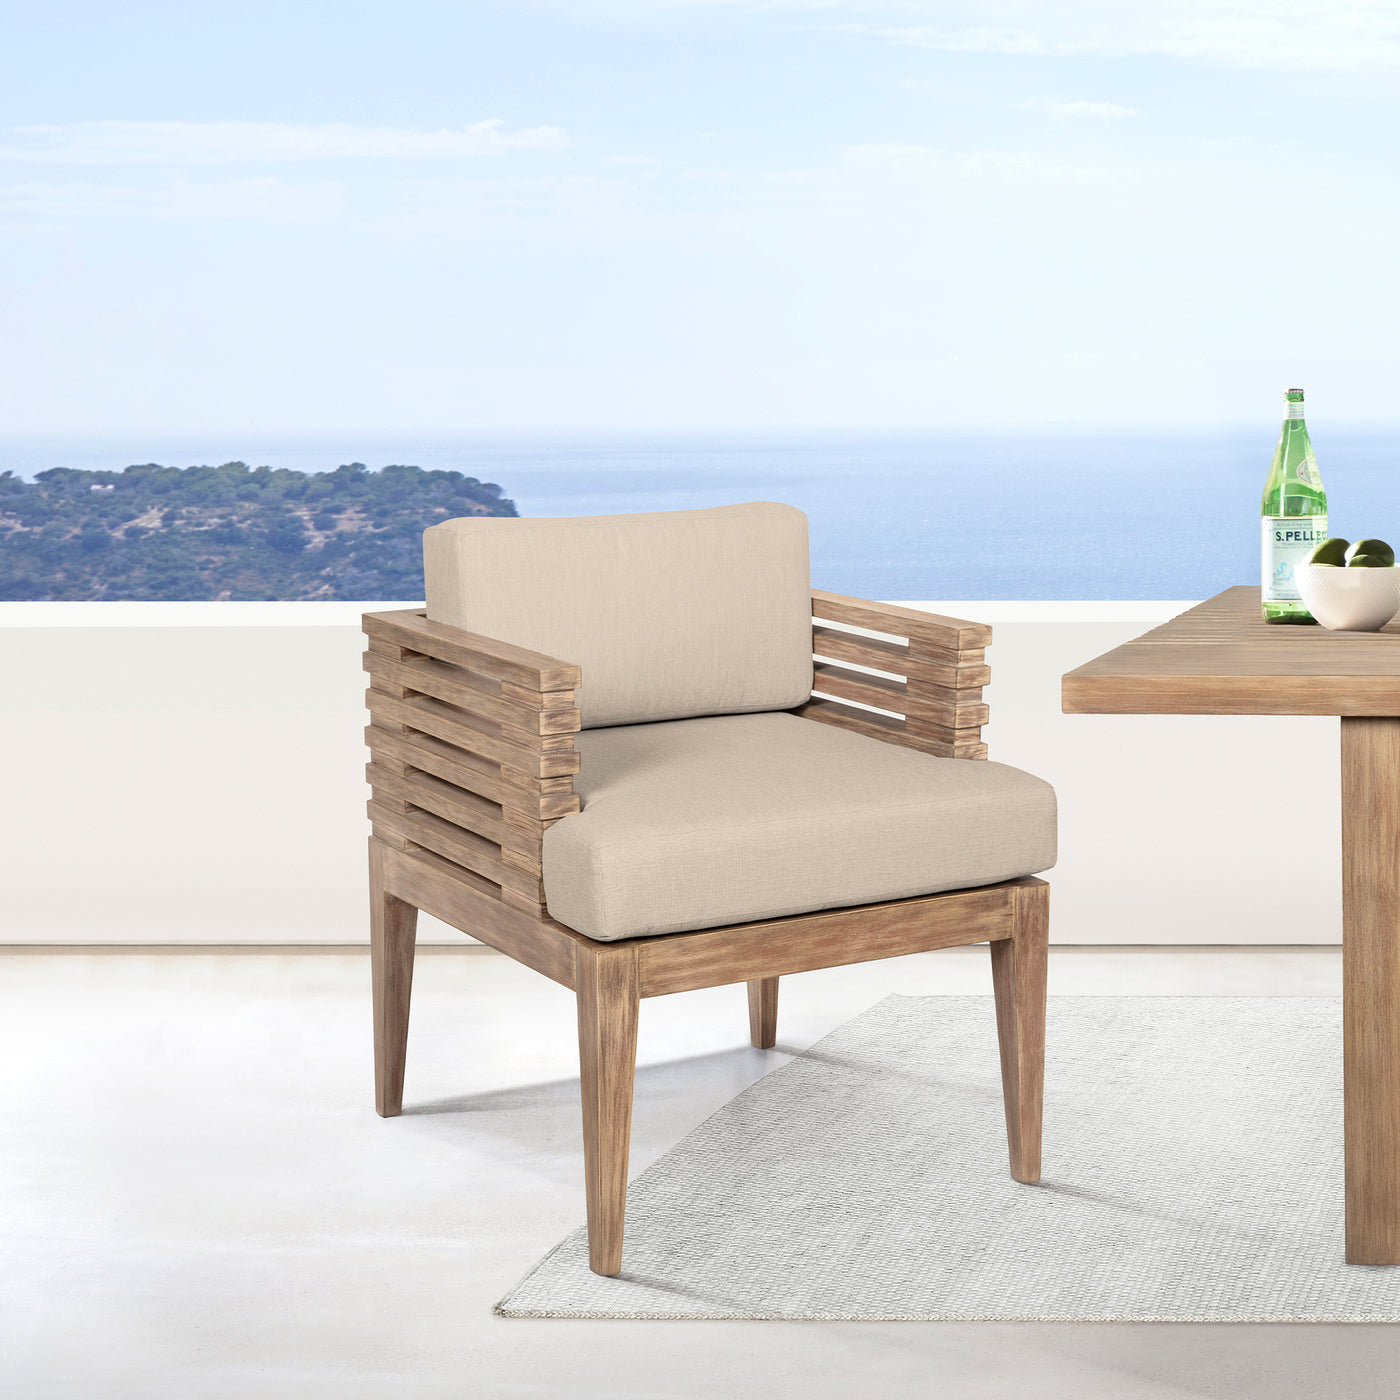 Vivid Outdoor Dining Chair